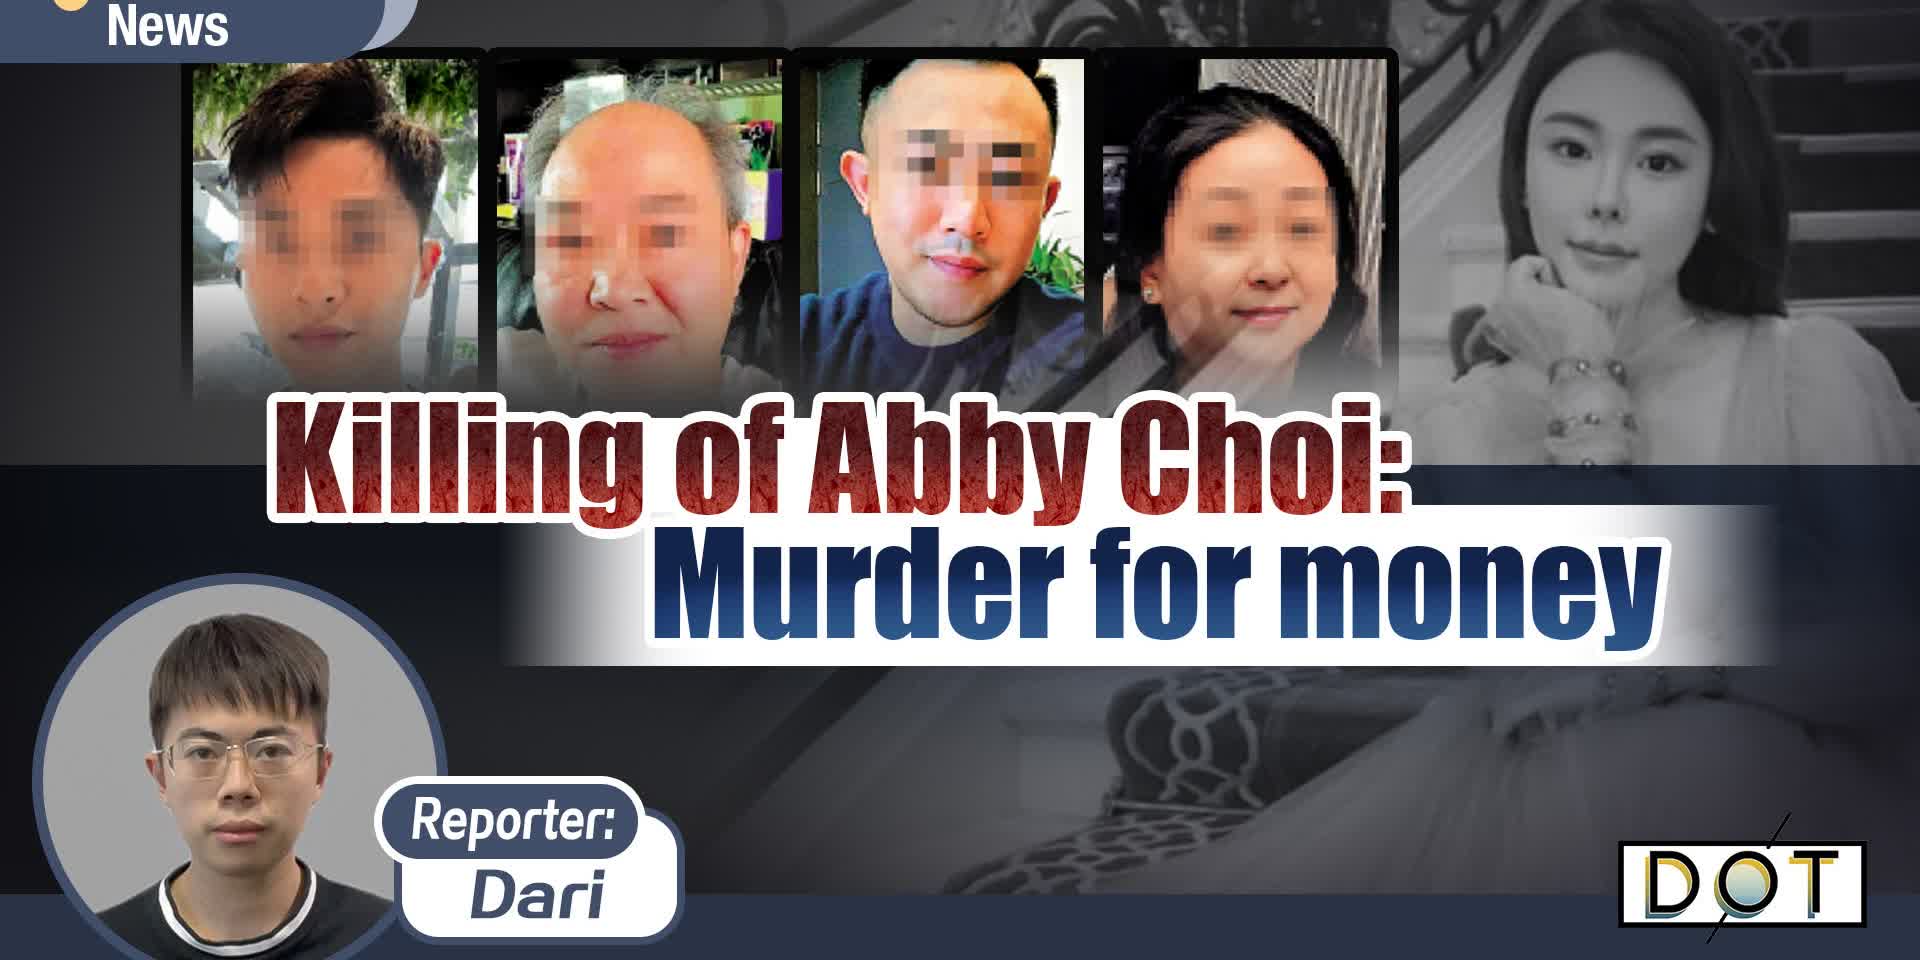 Watch This | Killing of Abby Choi: Murder for money